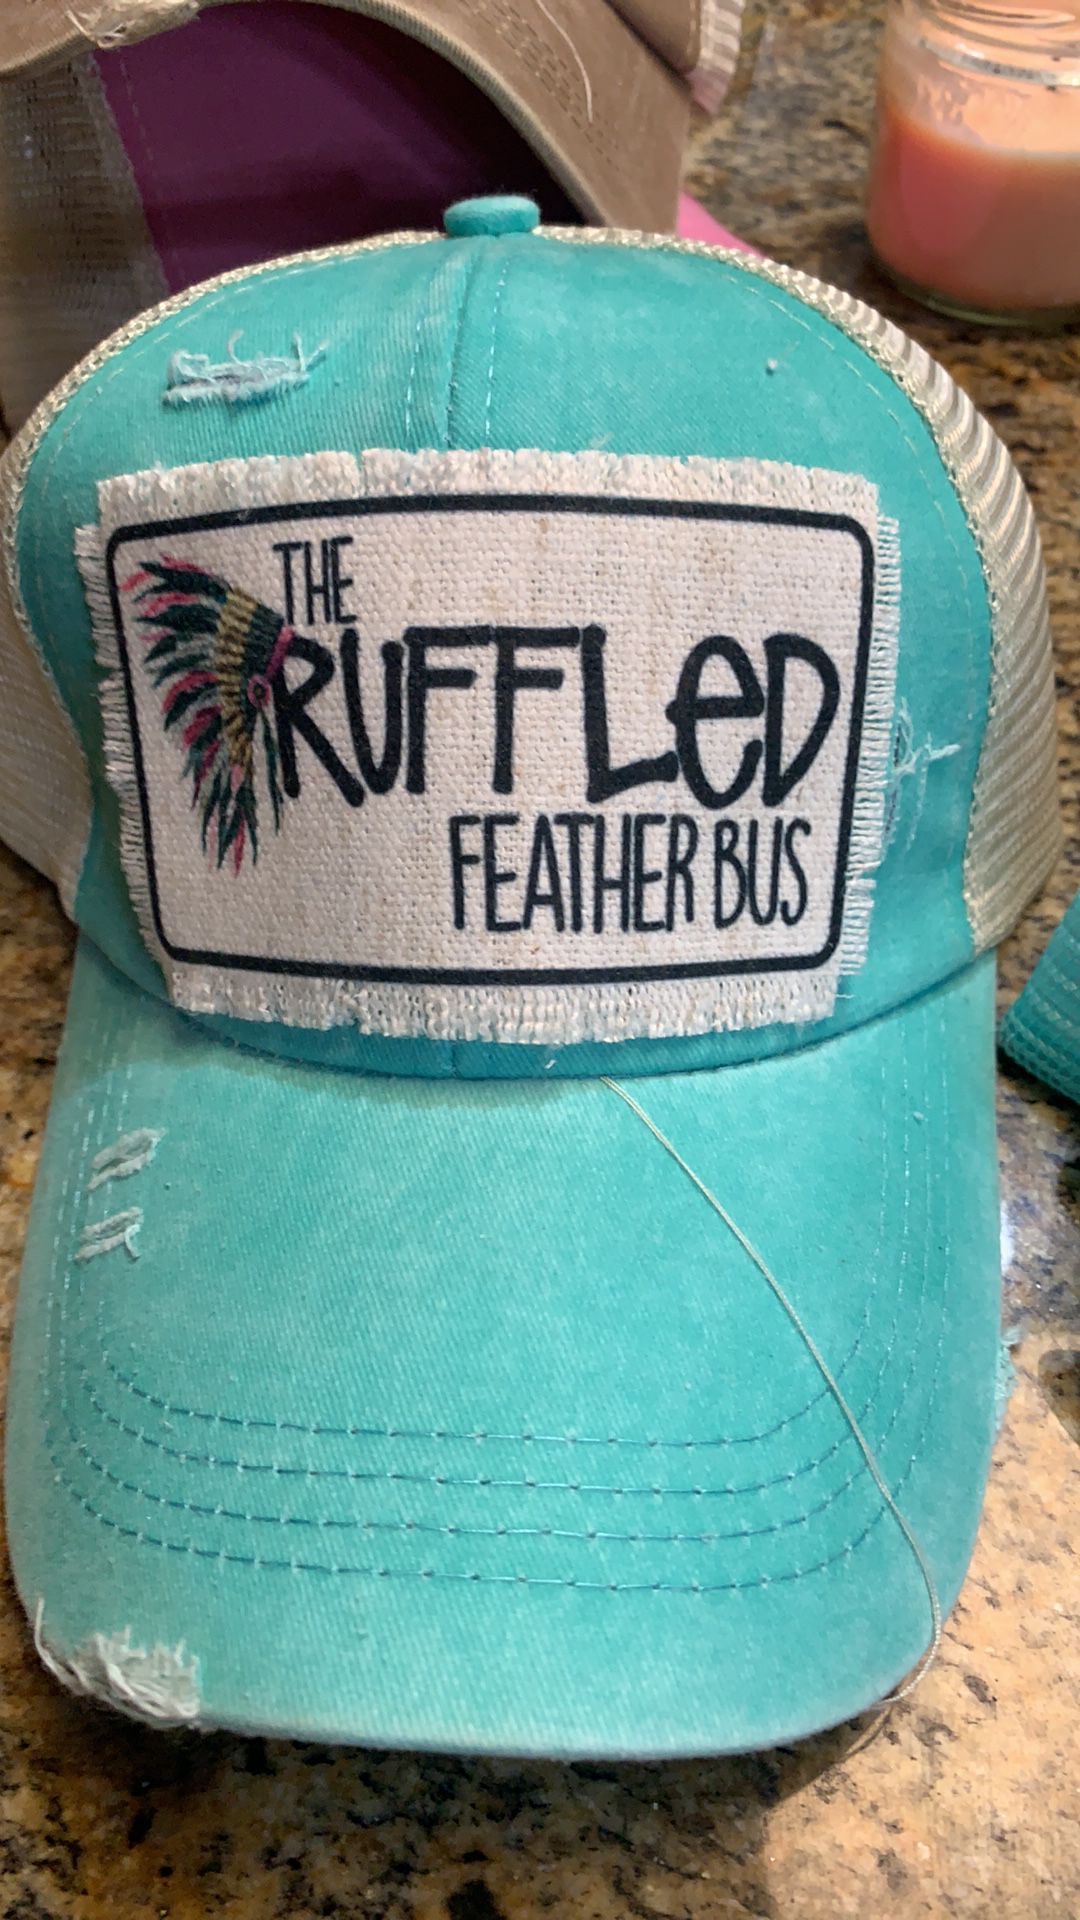 The Ruffled Feather Bus Criss Cross Hats